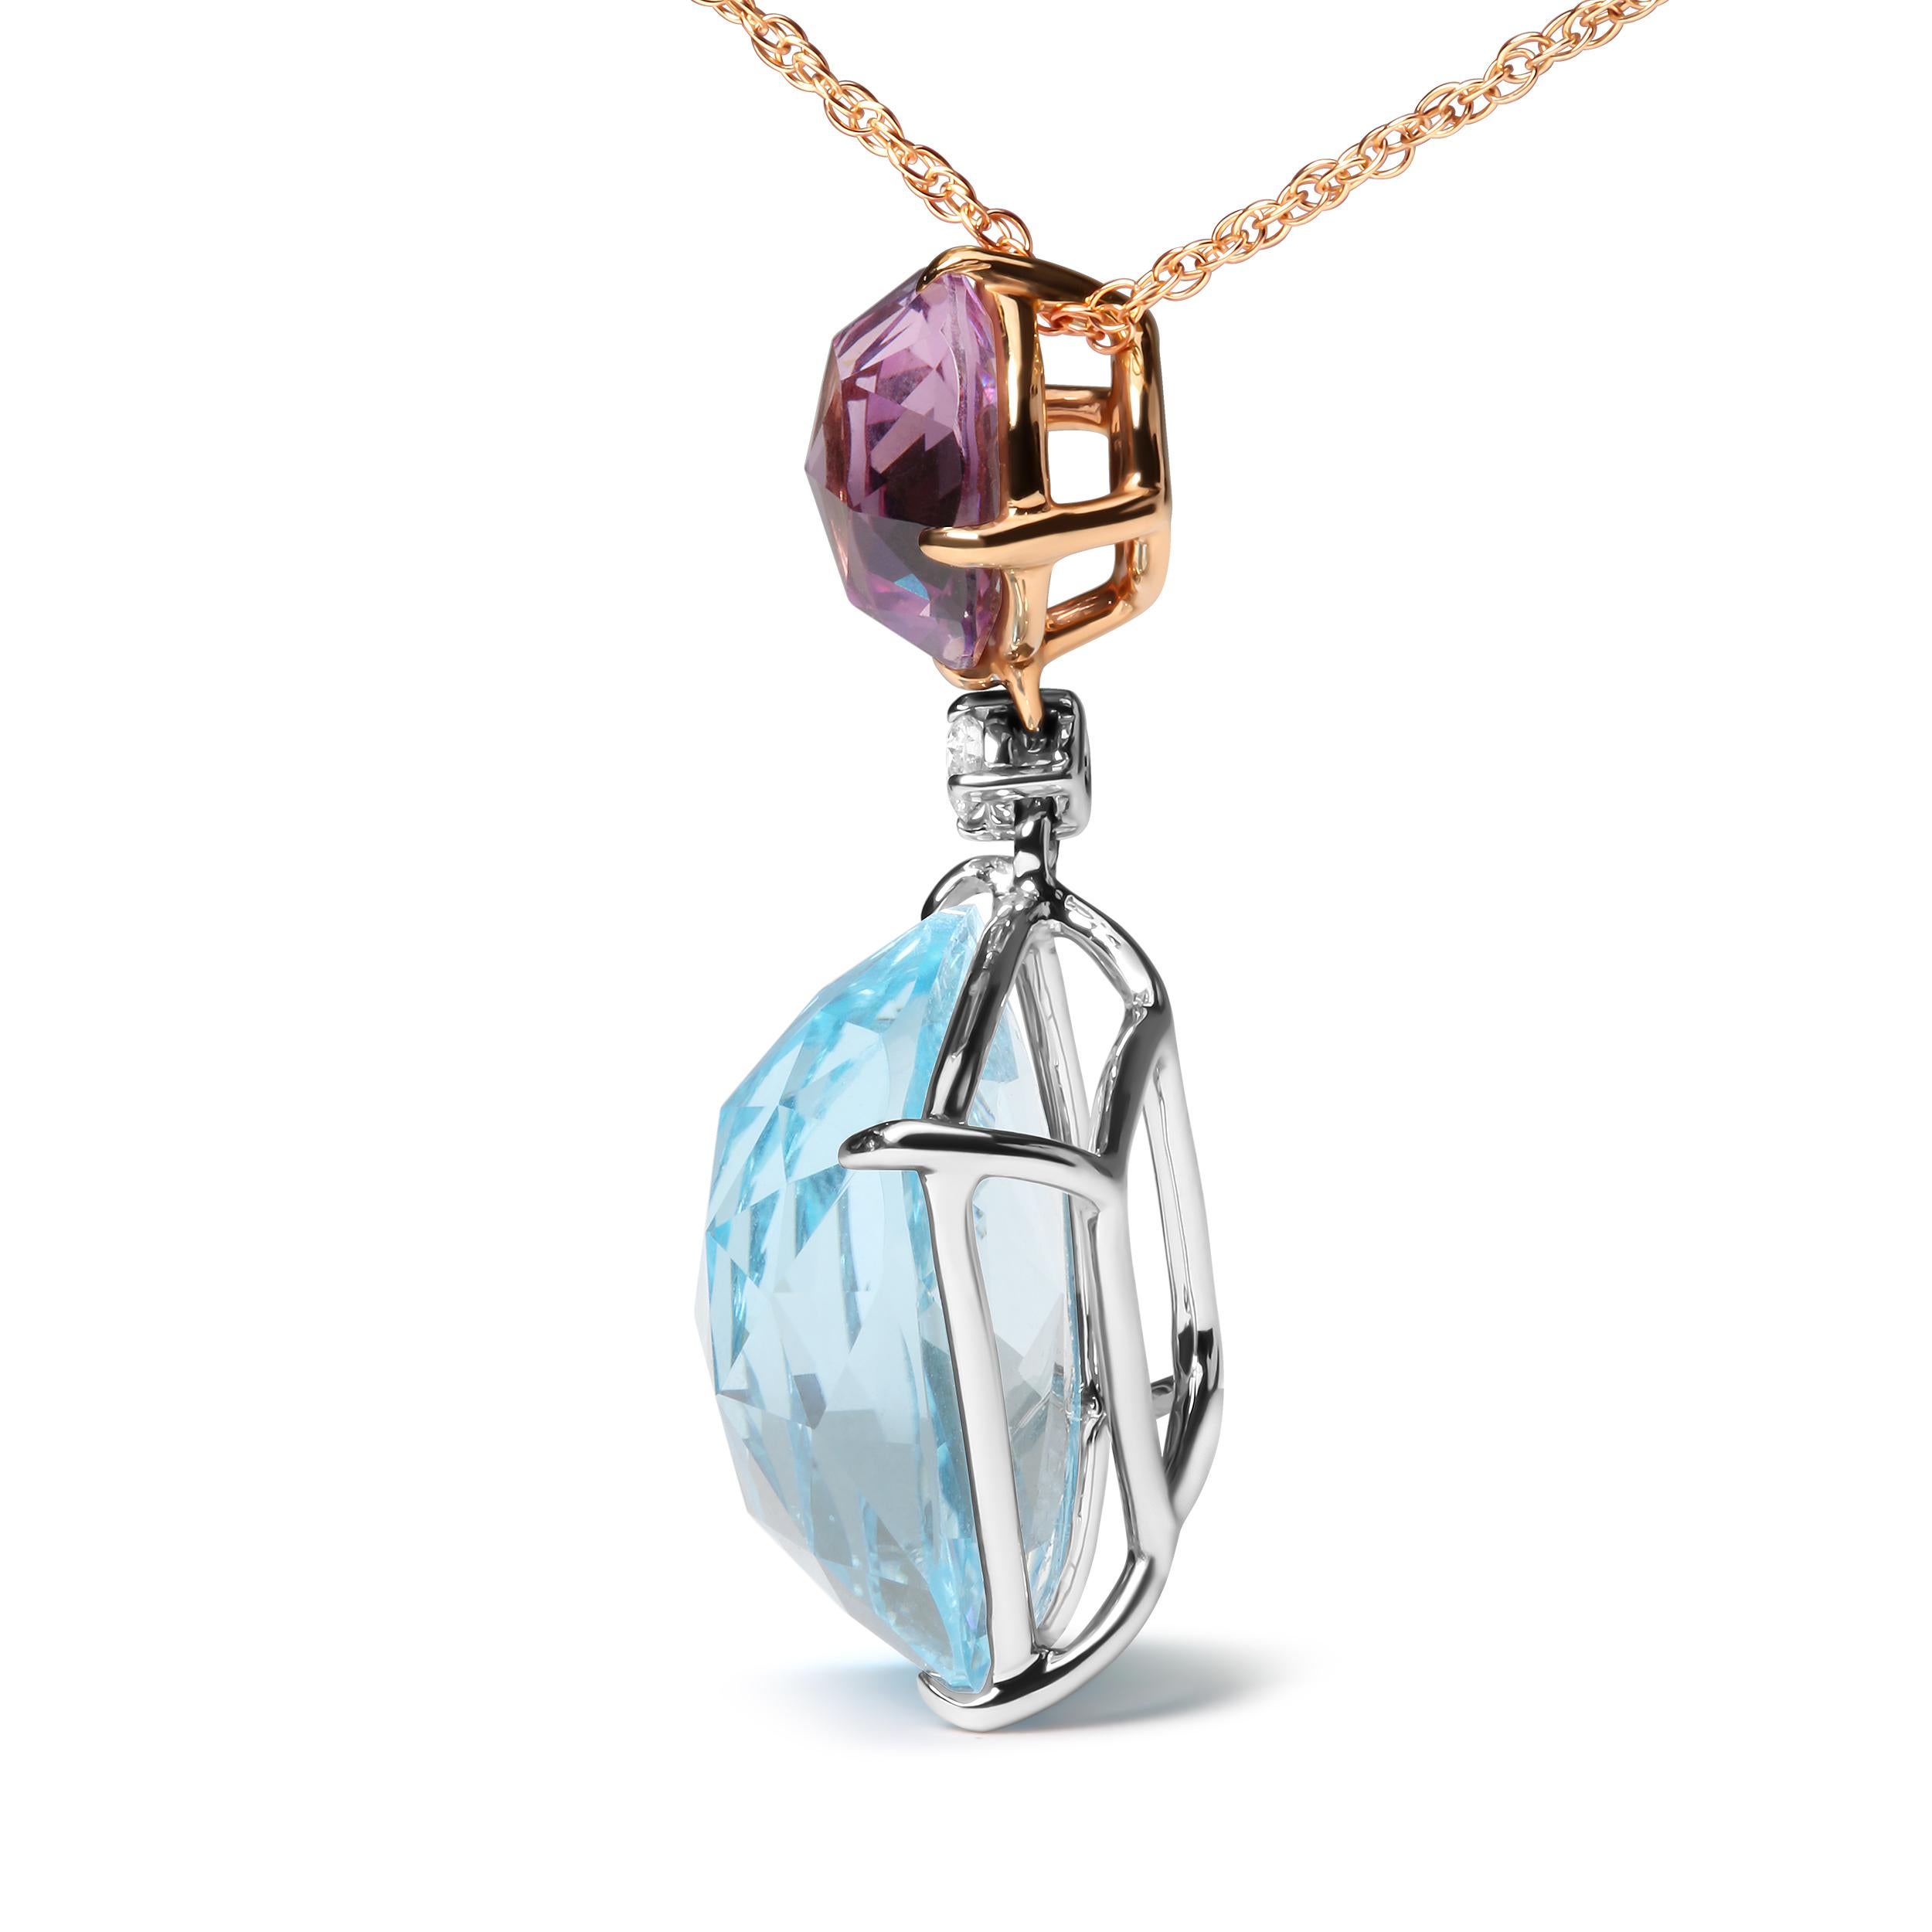 Contemporary 18K White and Rose Gold Diamond & Pink Amethyst & Blue Topaz Pendant Necklace For Sale